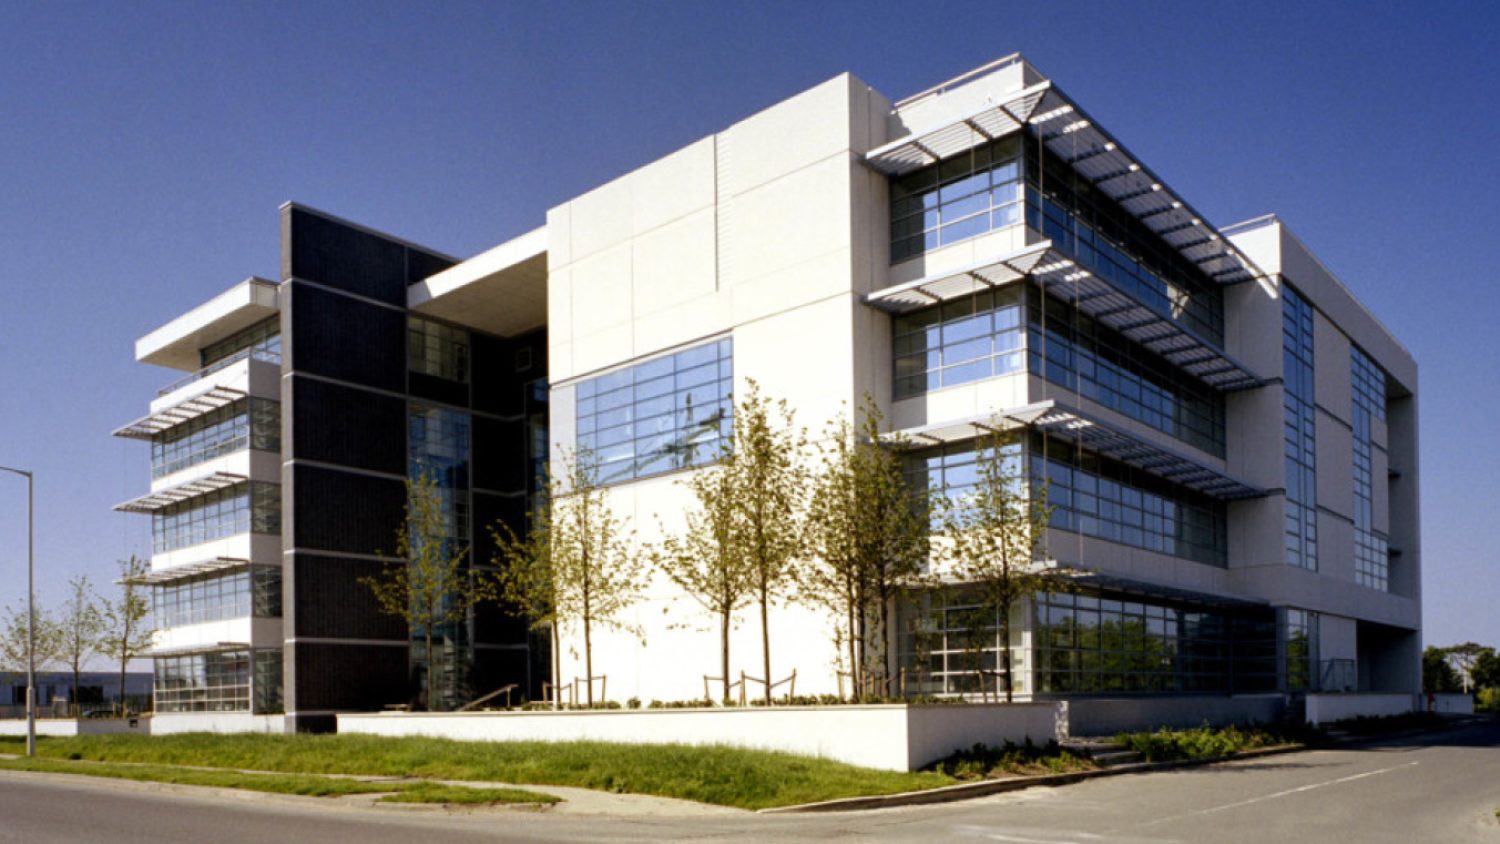 The Ethos Engineering office where Living Lab was developed (image: Ethos).